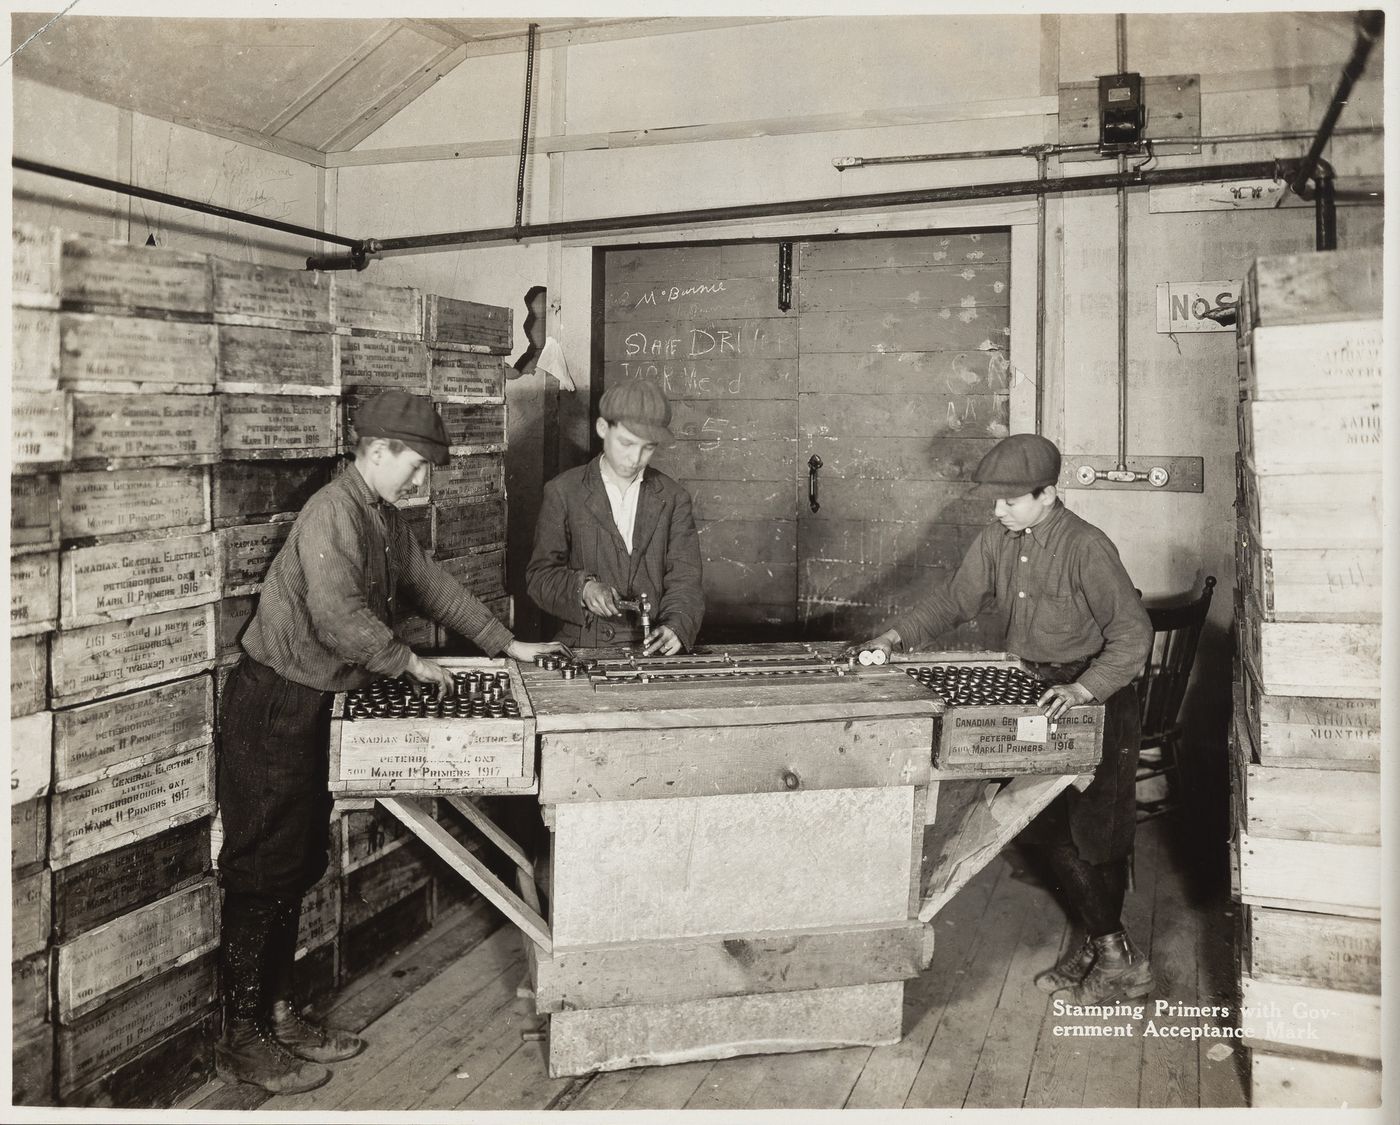 Interior view of workers stamping primers with government acceptance mark at the Energite Explosives Plant No. 3, the Shell Loading Plant, Renfrew, Ontario, Canada